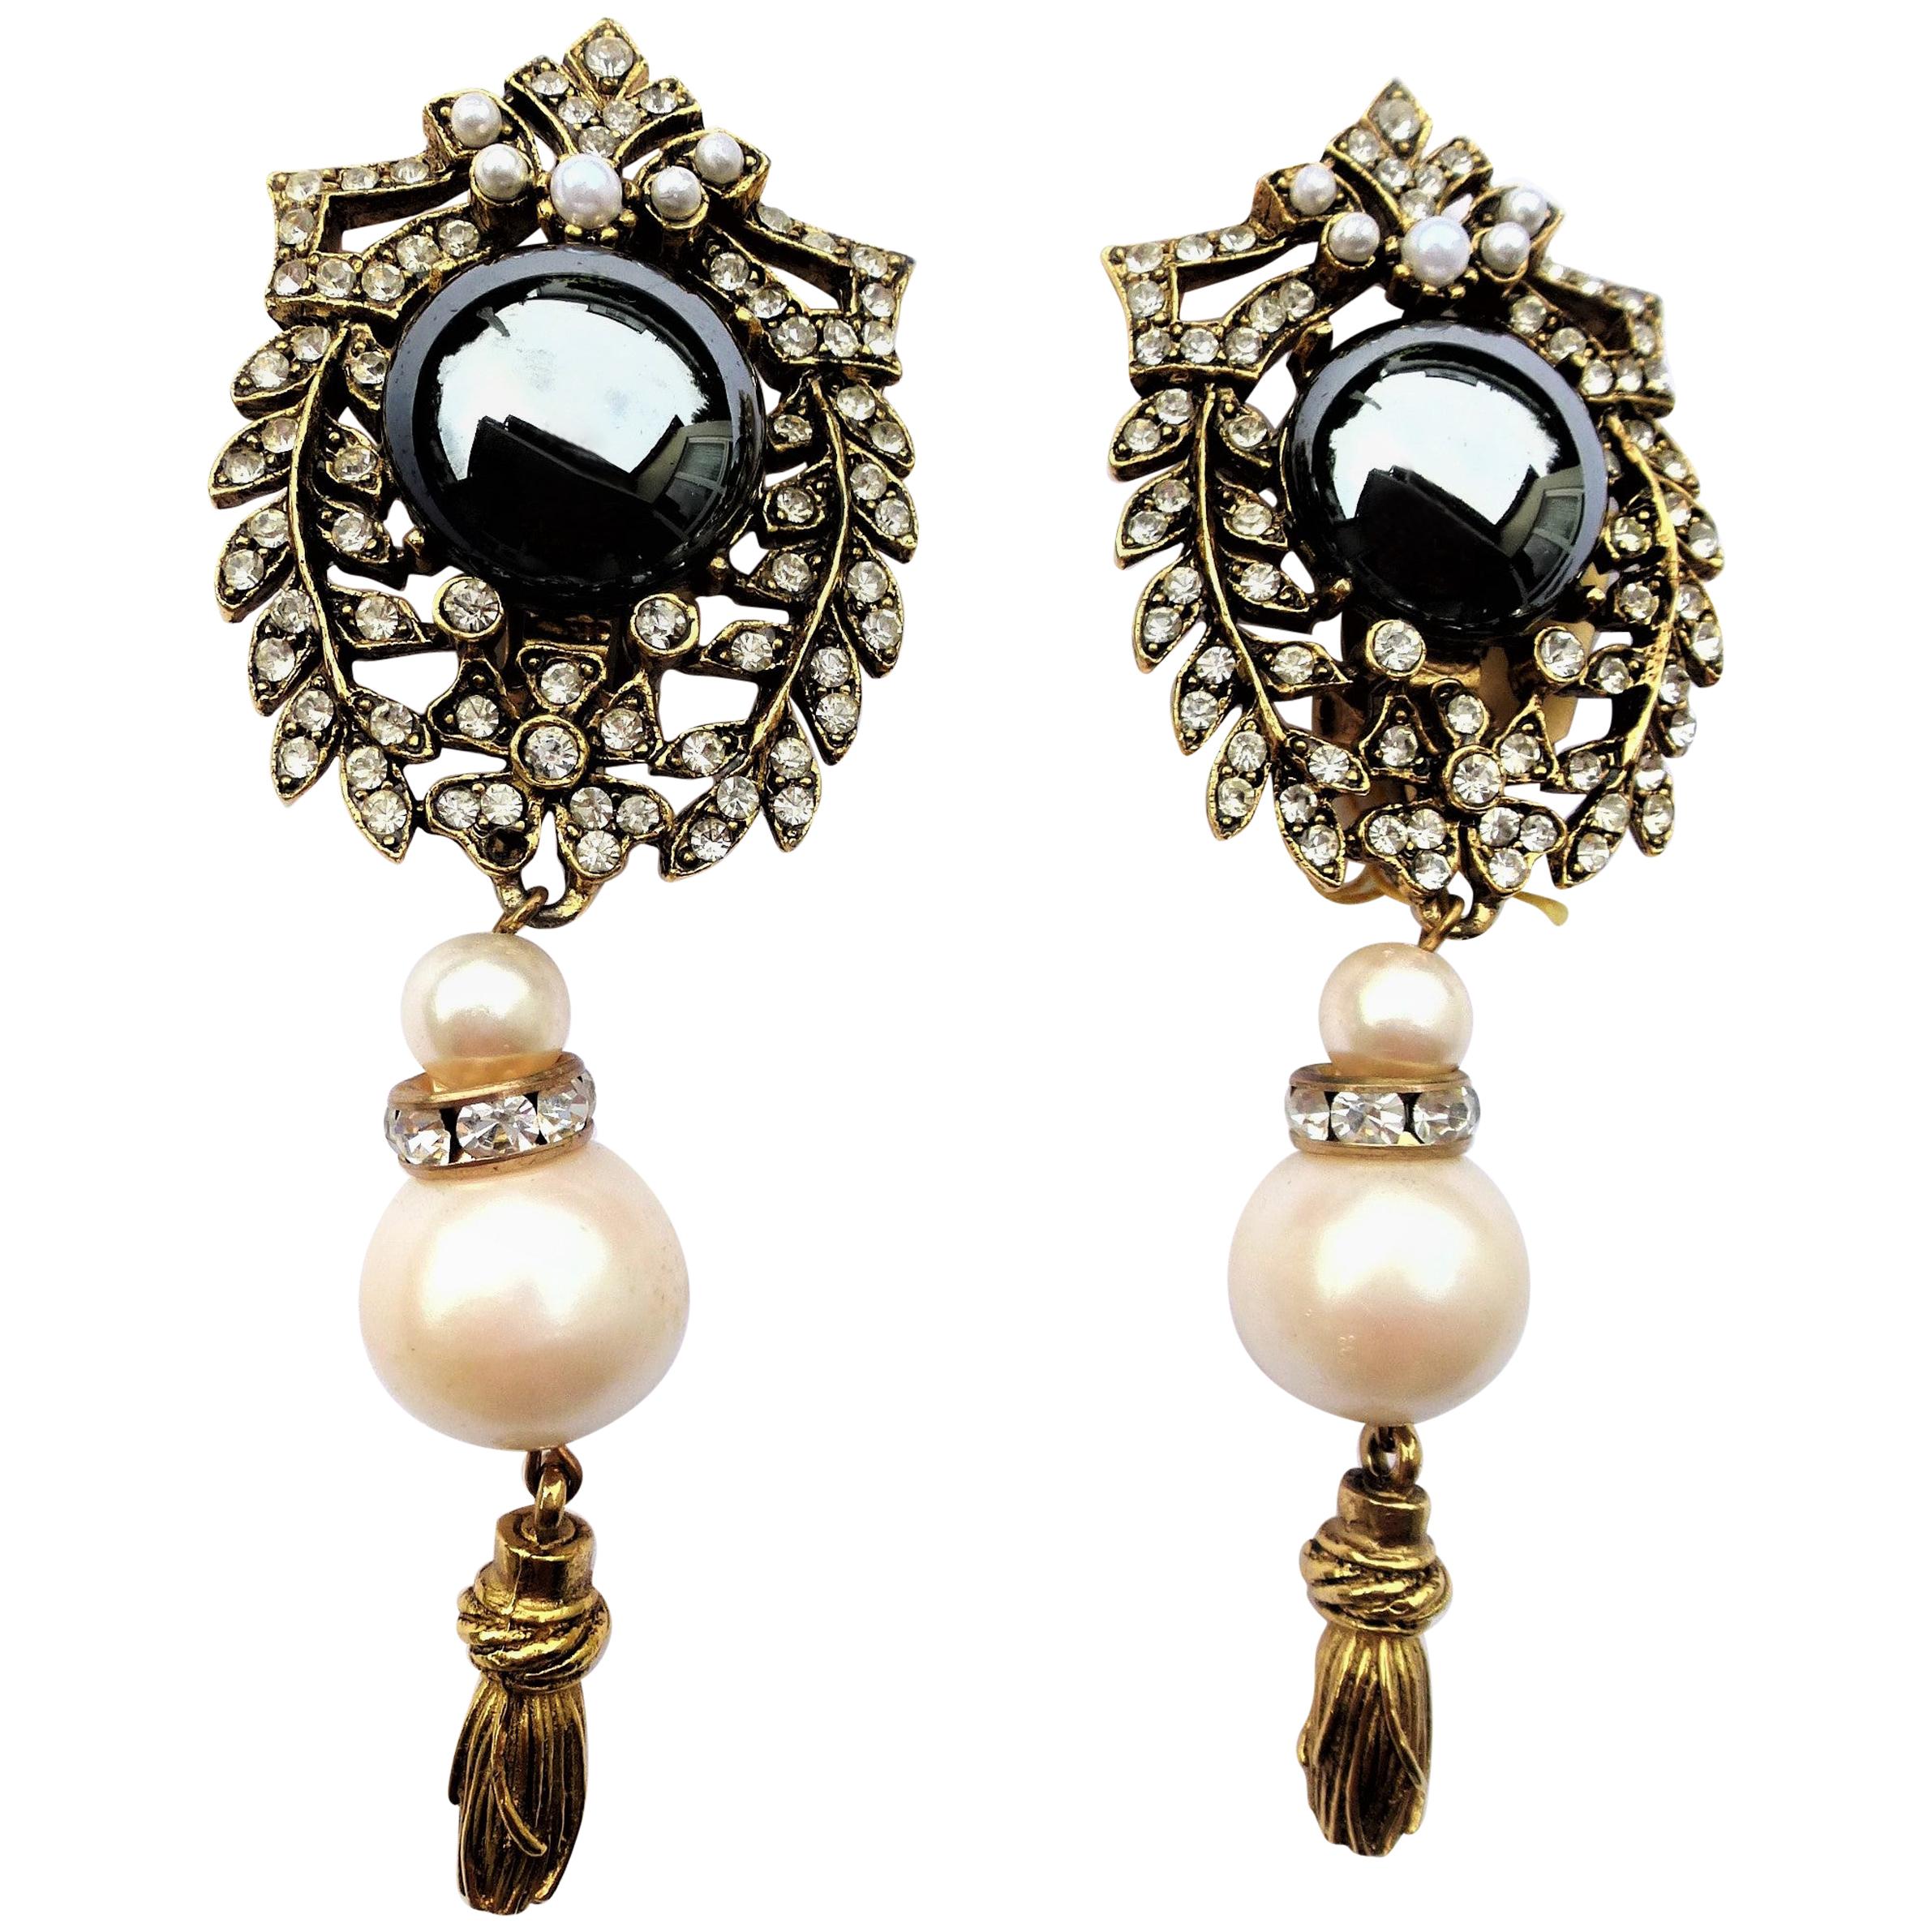 A lovely long pair ear clips with rhinestones, pearl and tassel